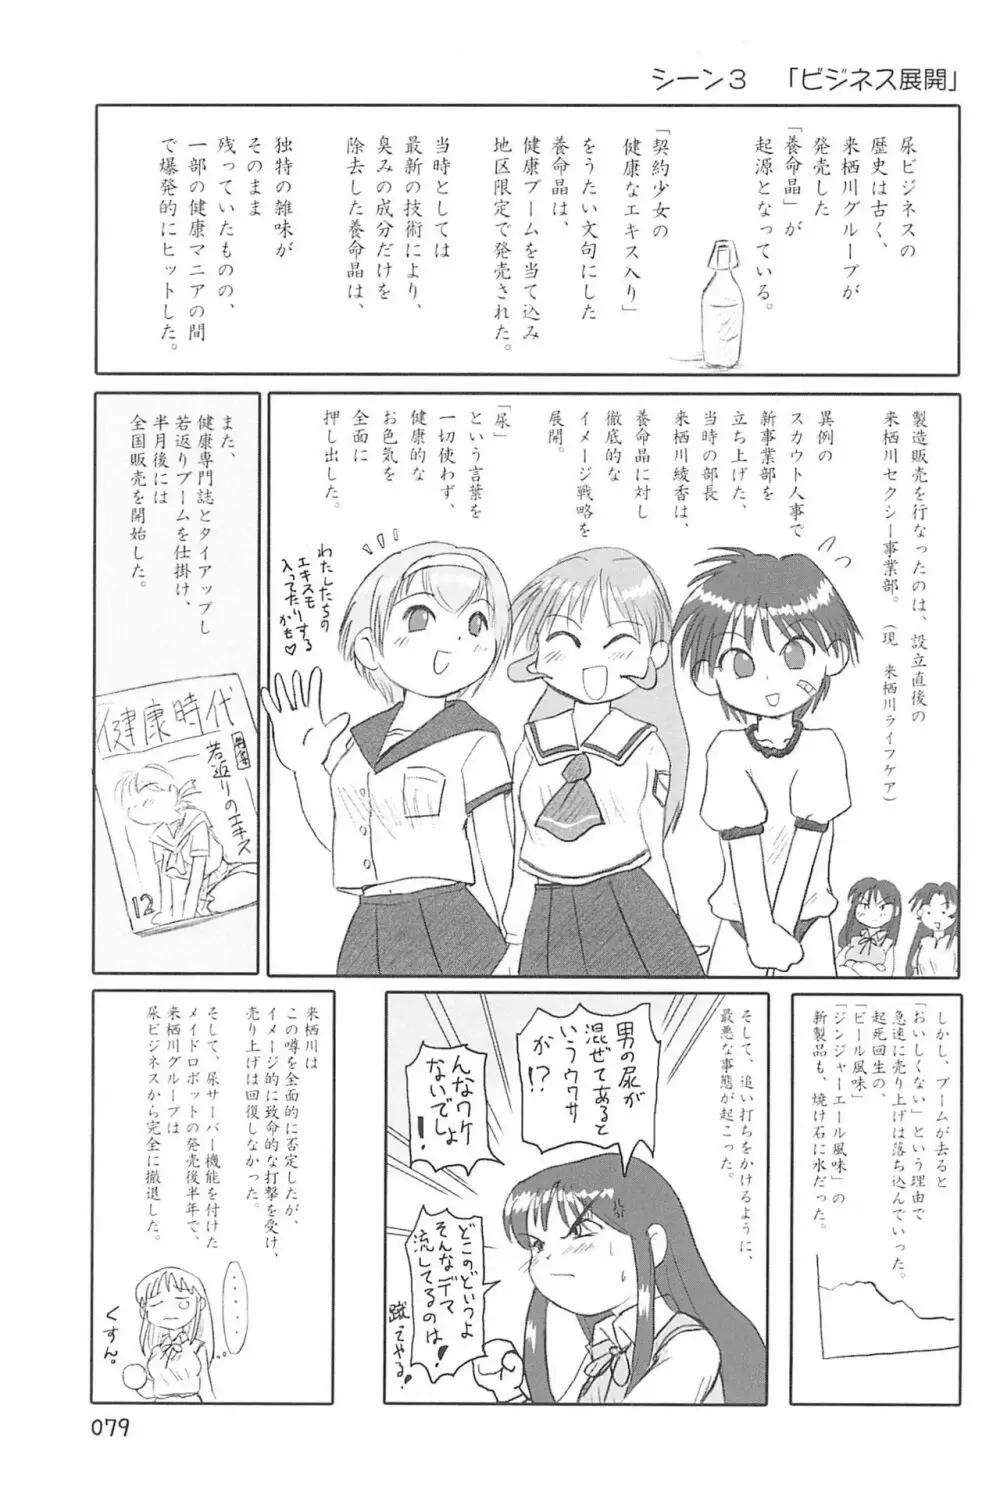 ND-special Volume 4 79ページ